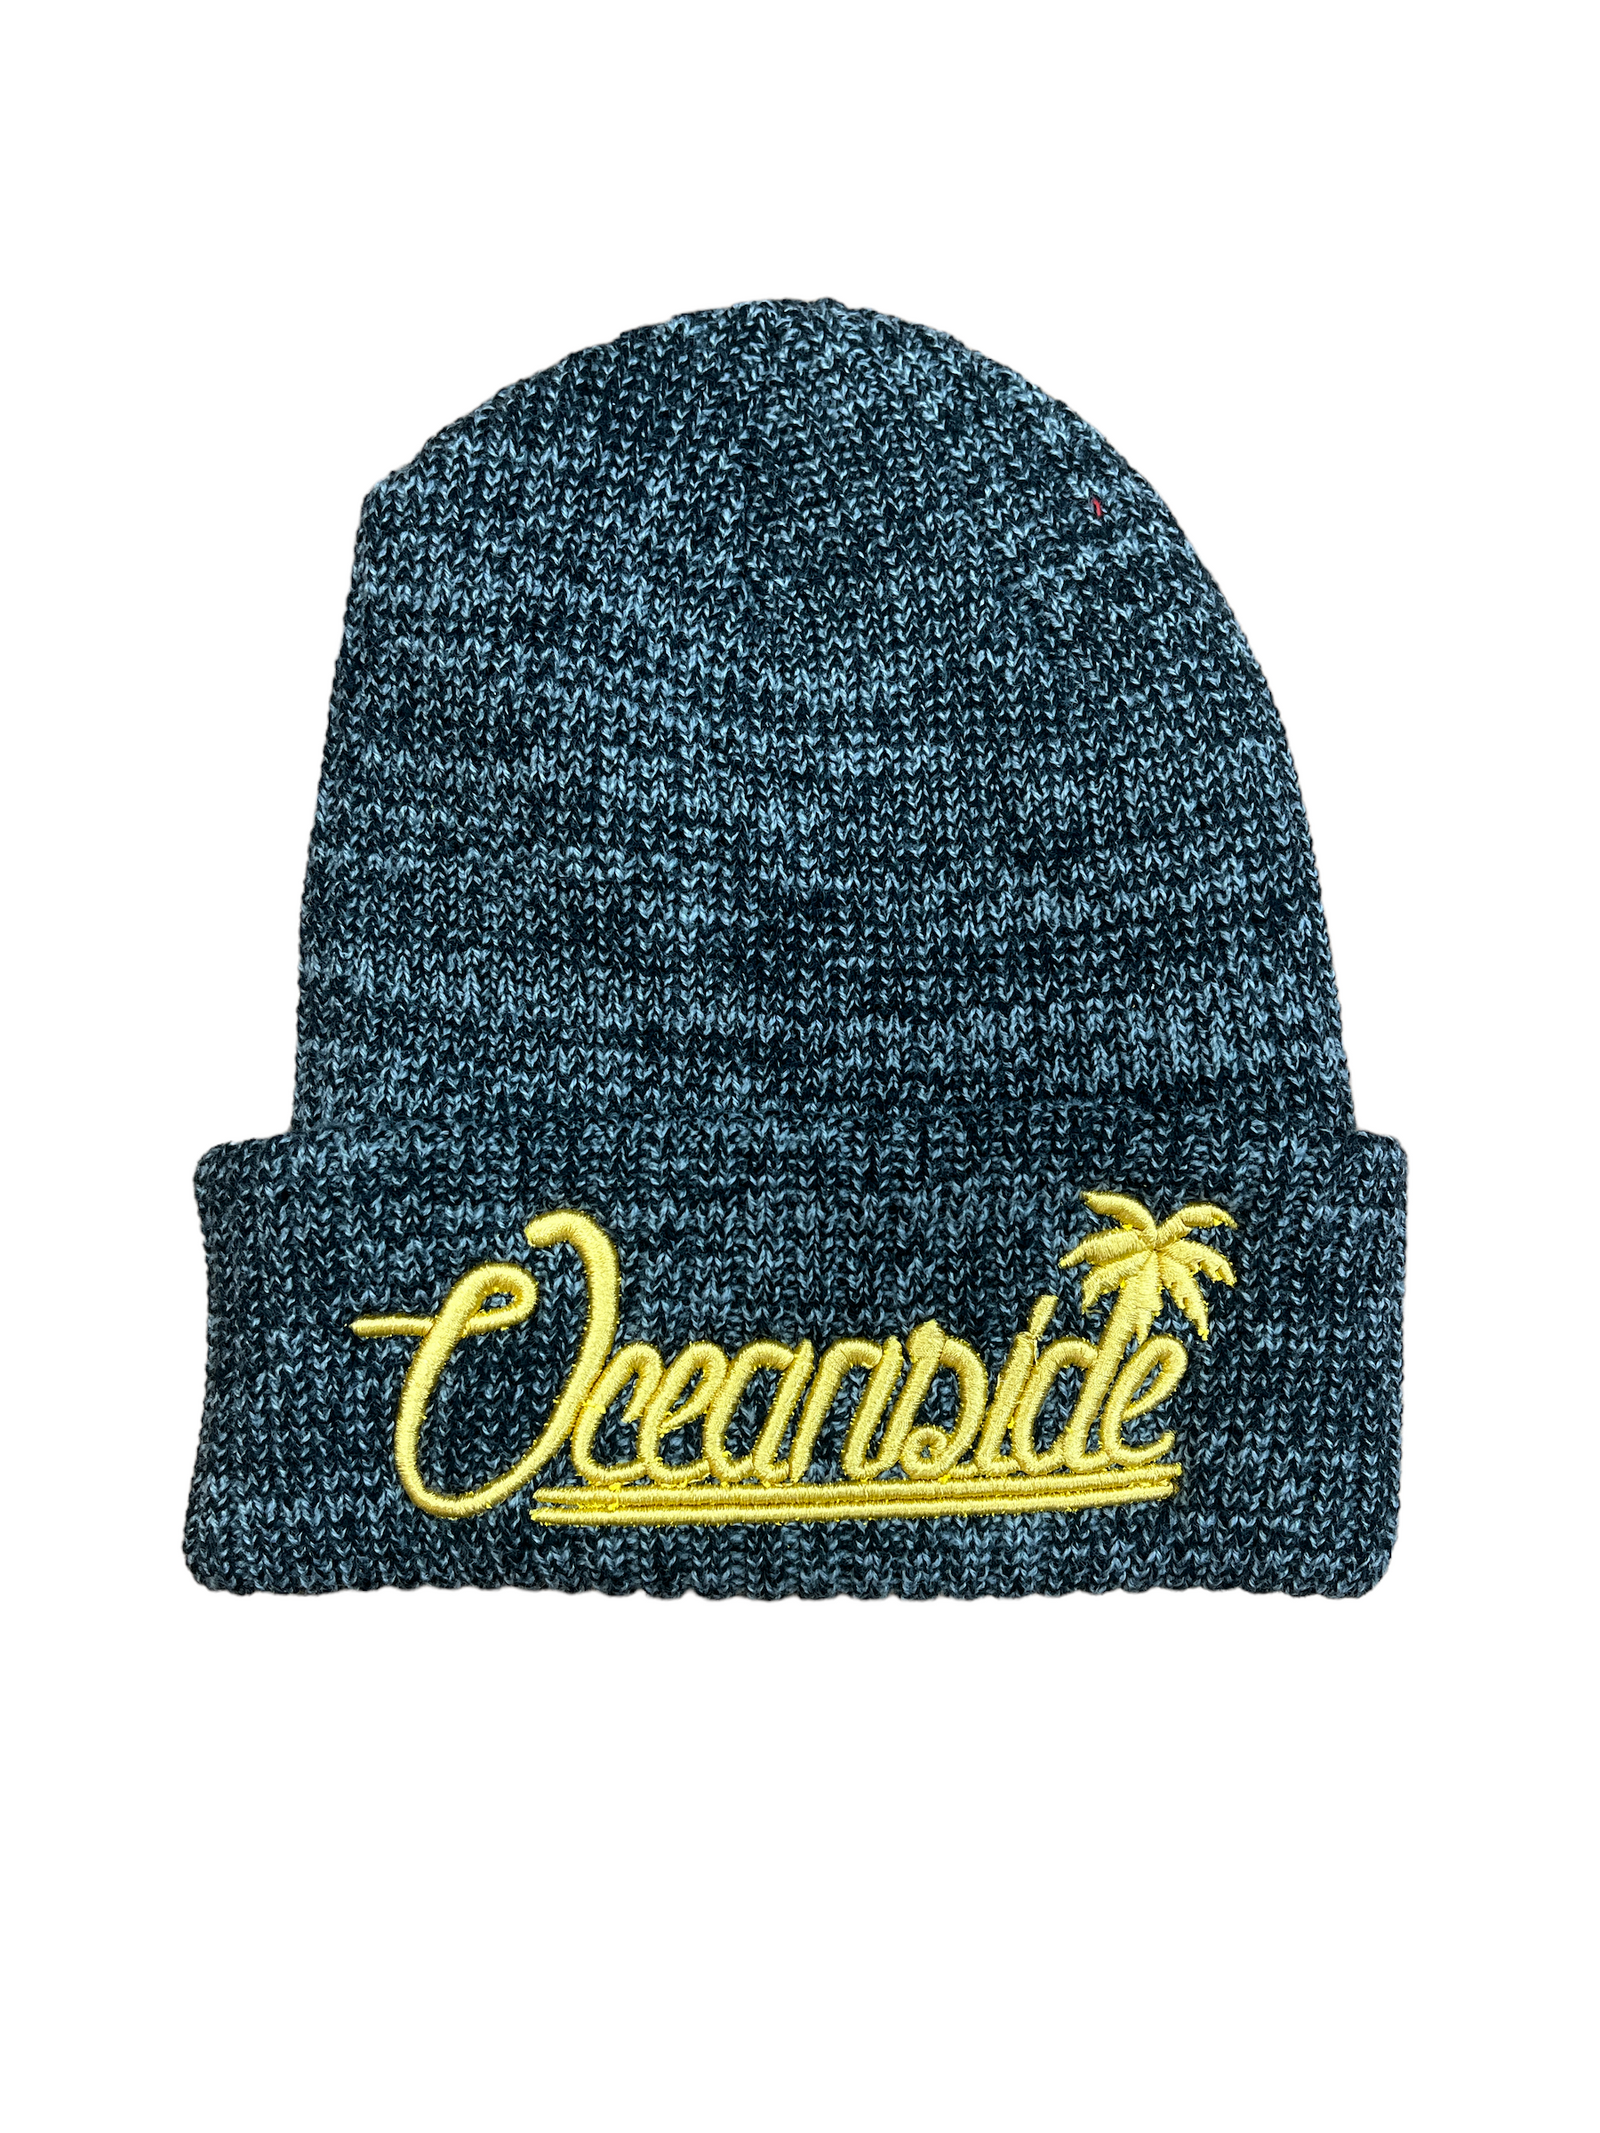 Oceanside Classic Palm Tree Beanie Knitted (Grey & Yellow)